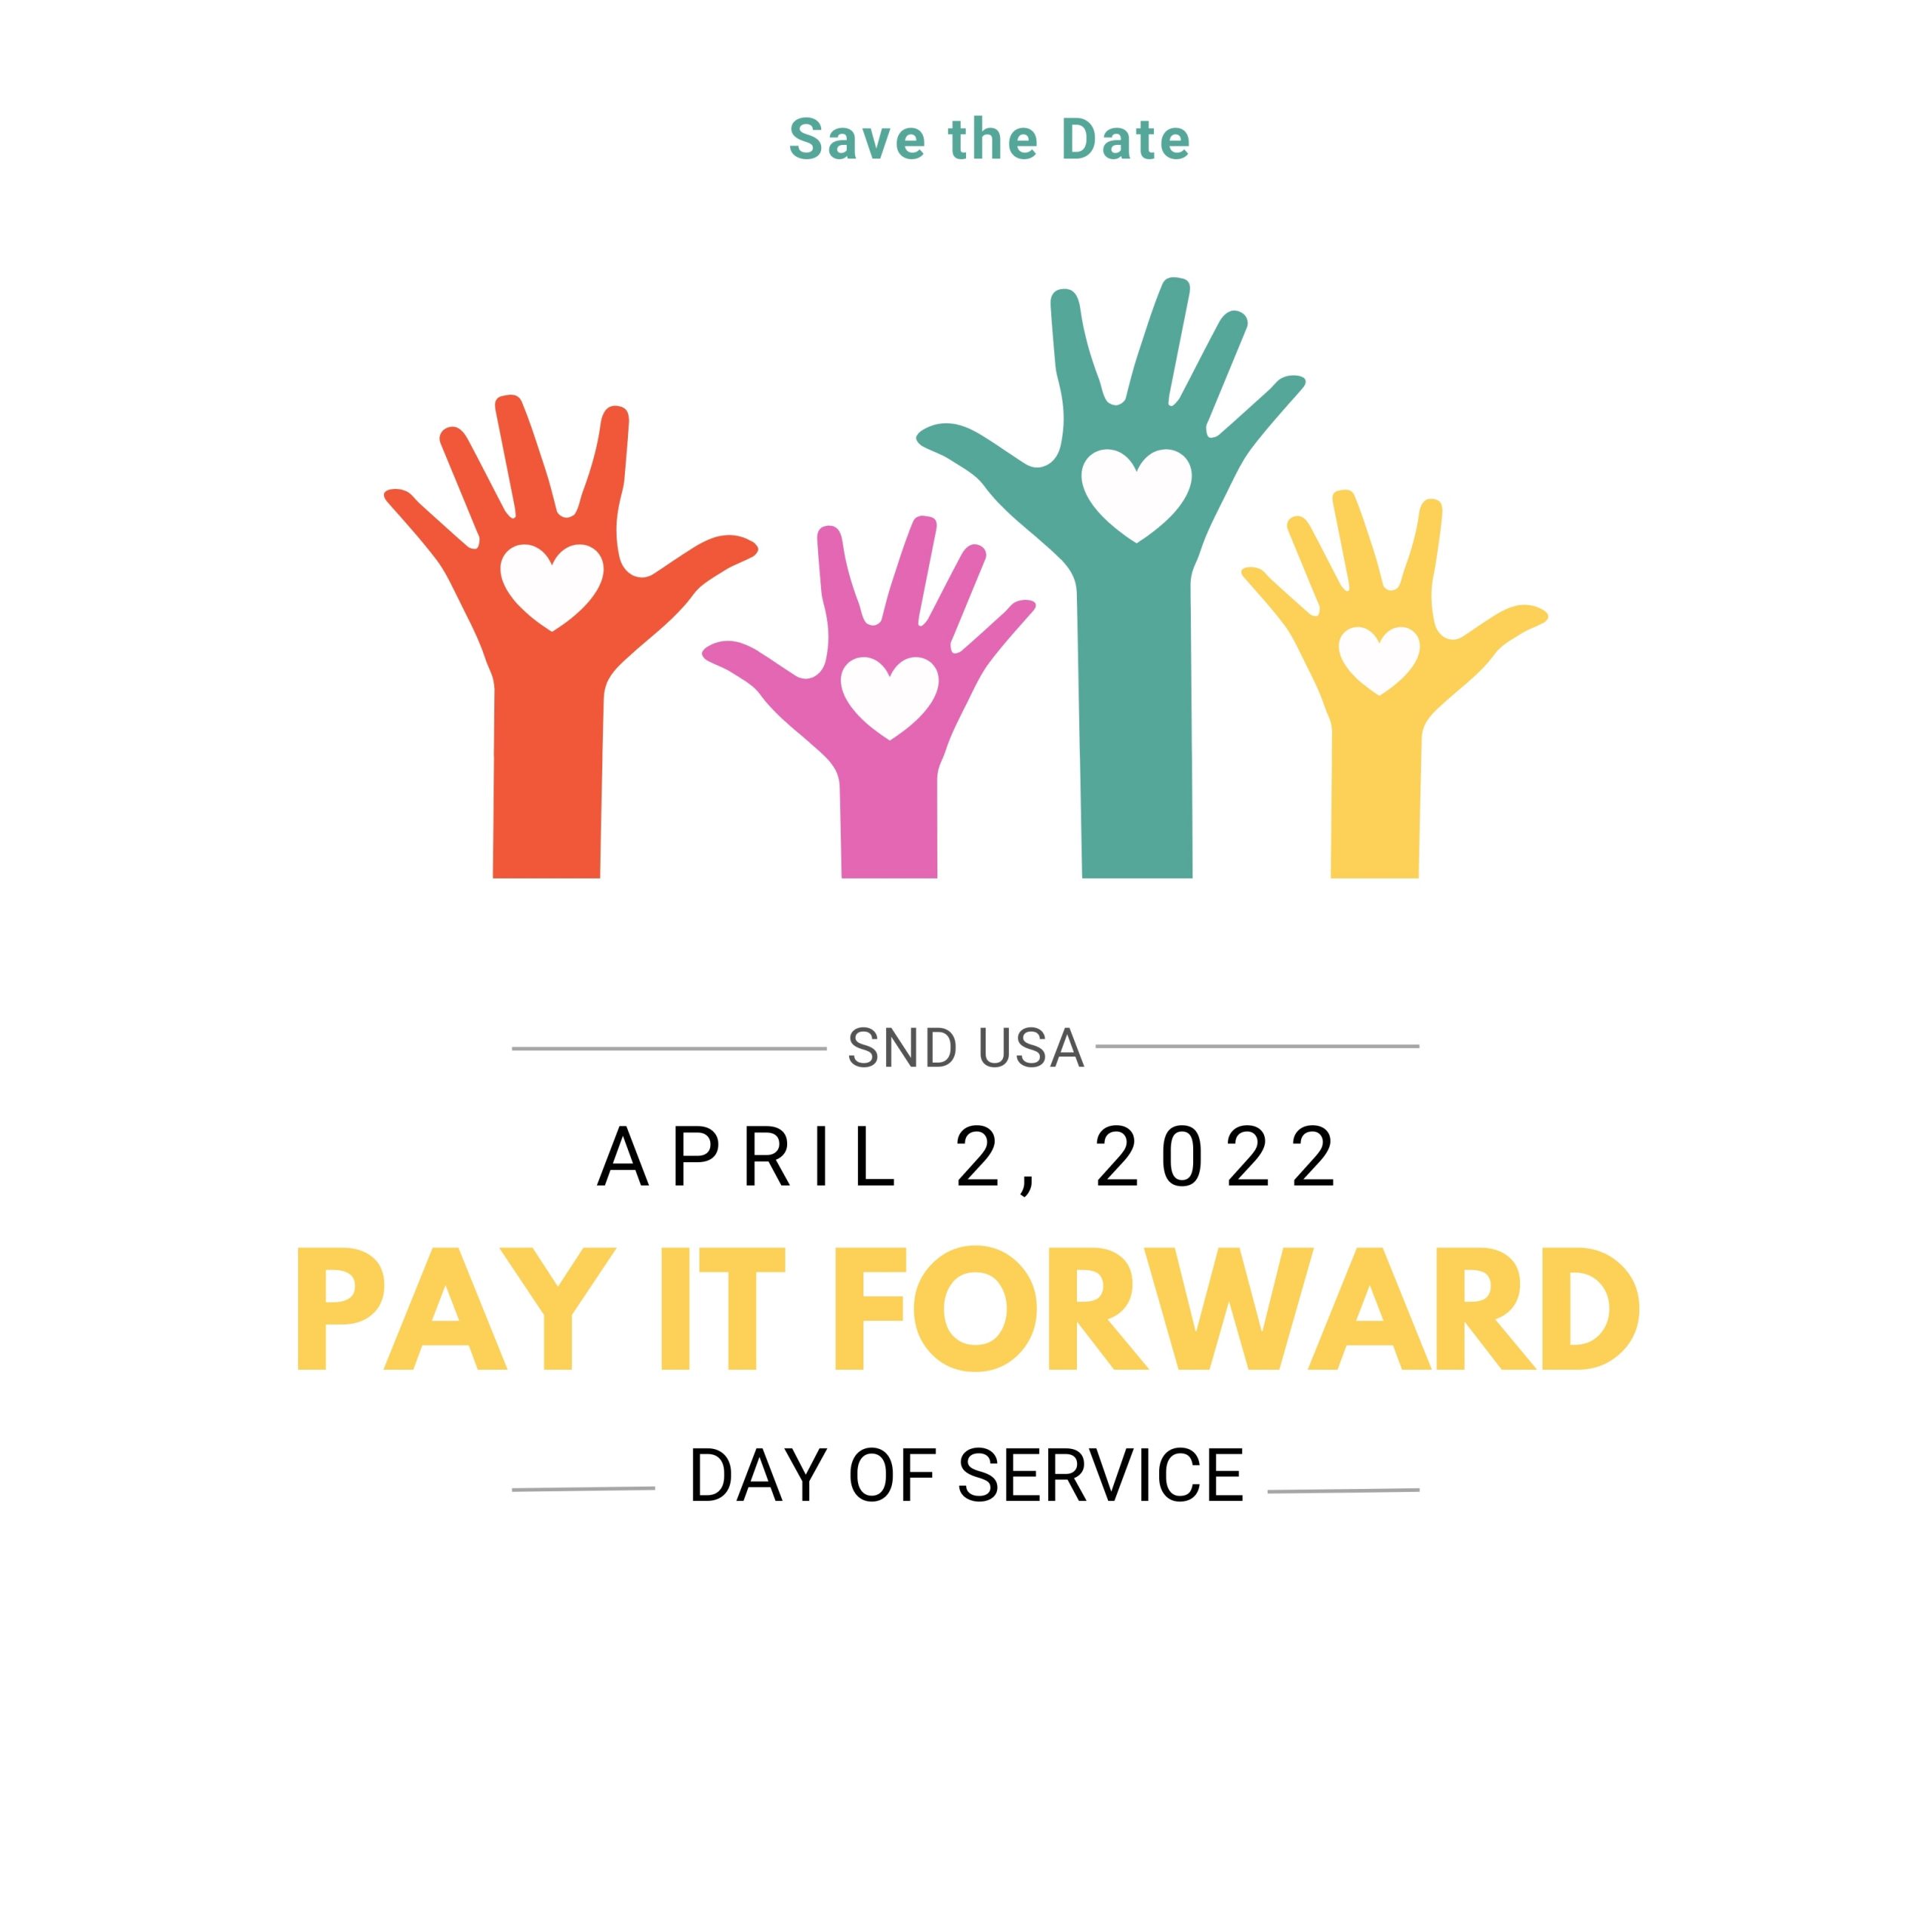 Pay-it-Forward-Save-the-Date-April-2